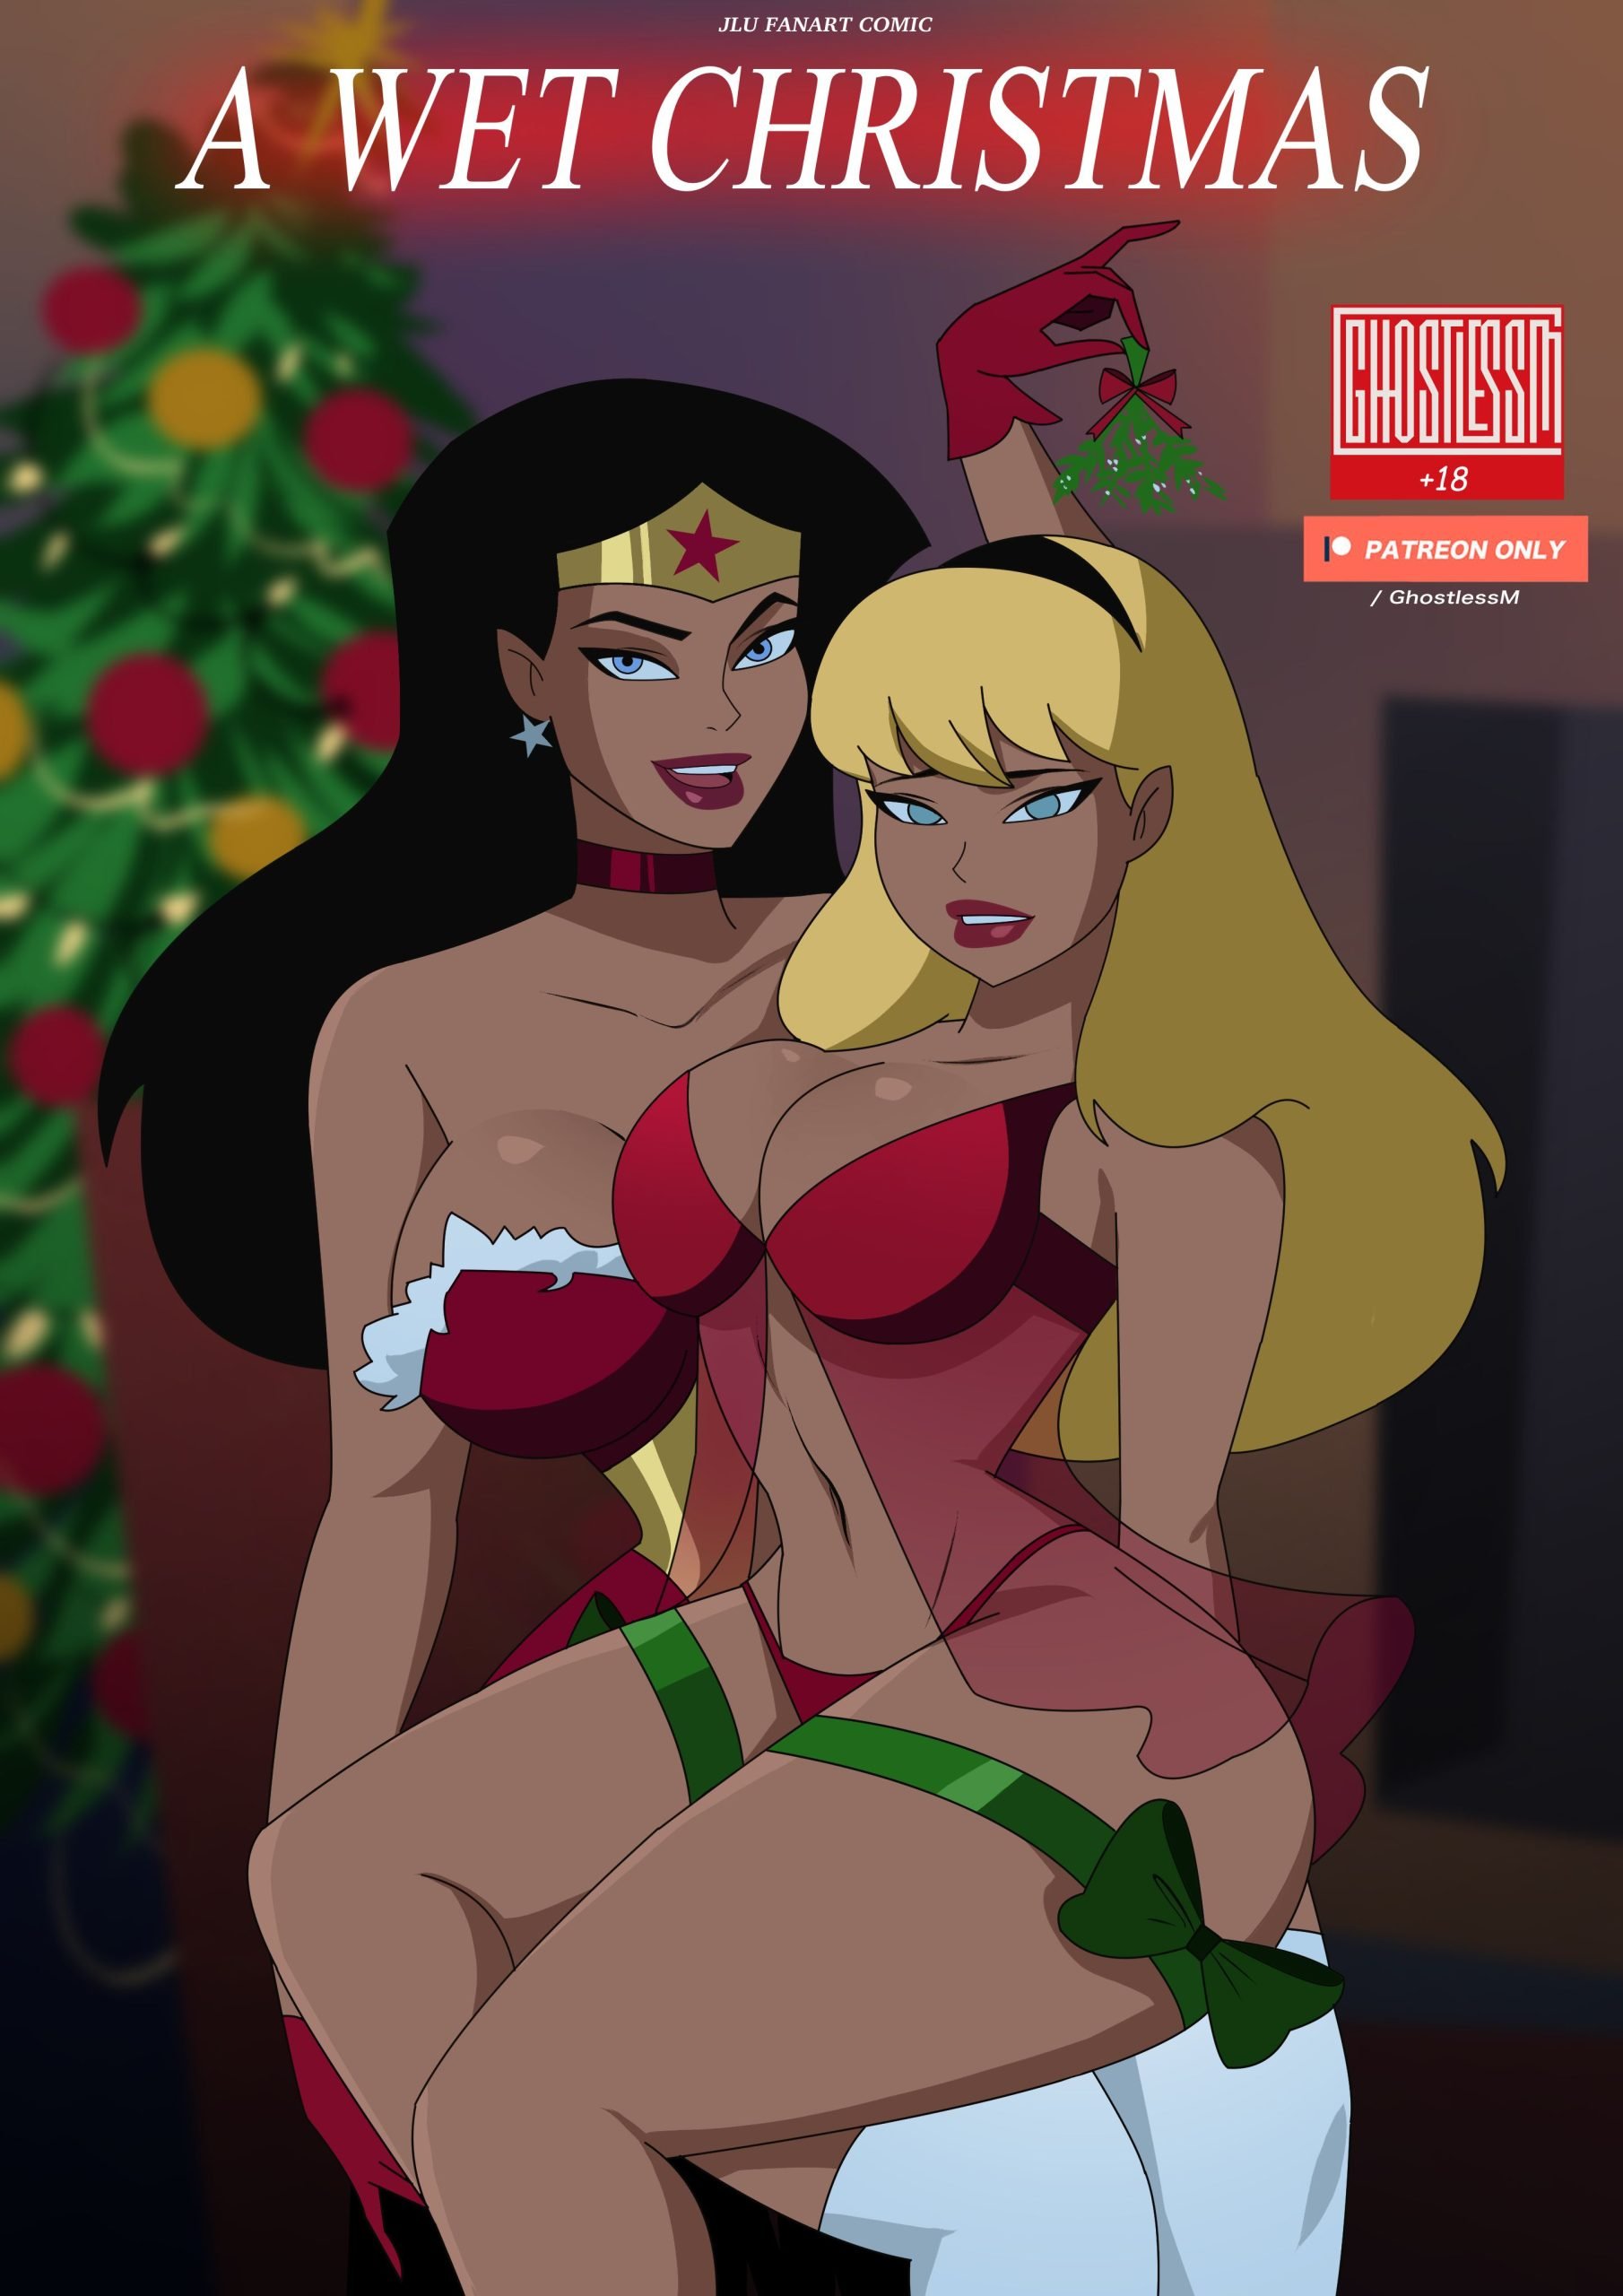 A Wet Christmas (Justice League) GhostlessM Porn Comic image picture